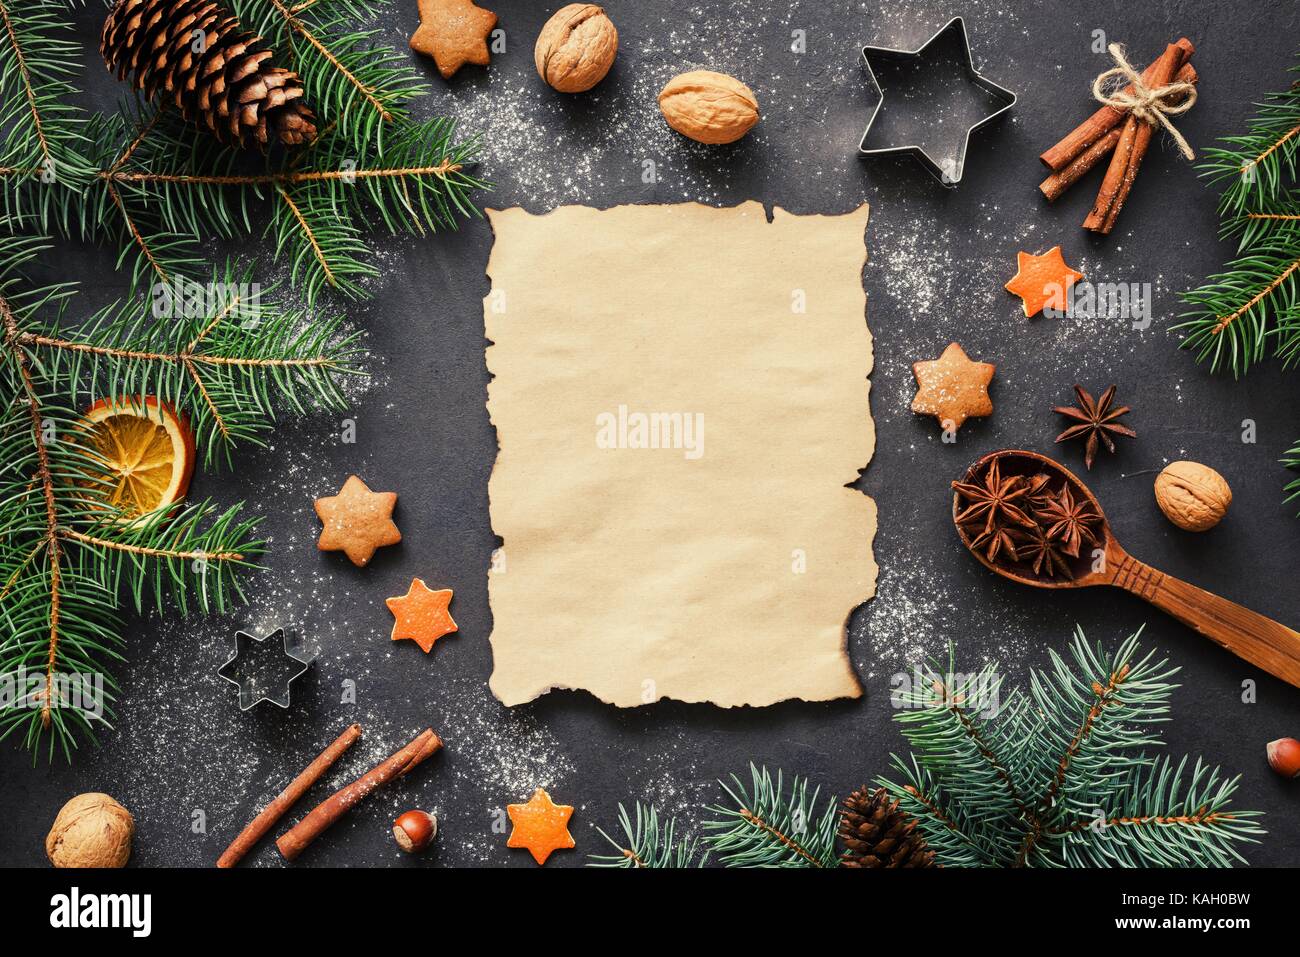 Santa wish list or Christmas letter background concept: holiday decorations, fir tree, spices, stars and cookie cutters with blank paper for text. Stock Photo